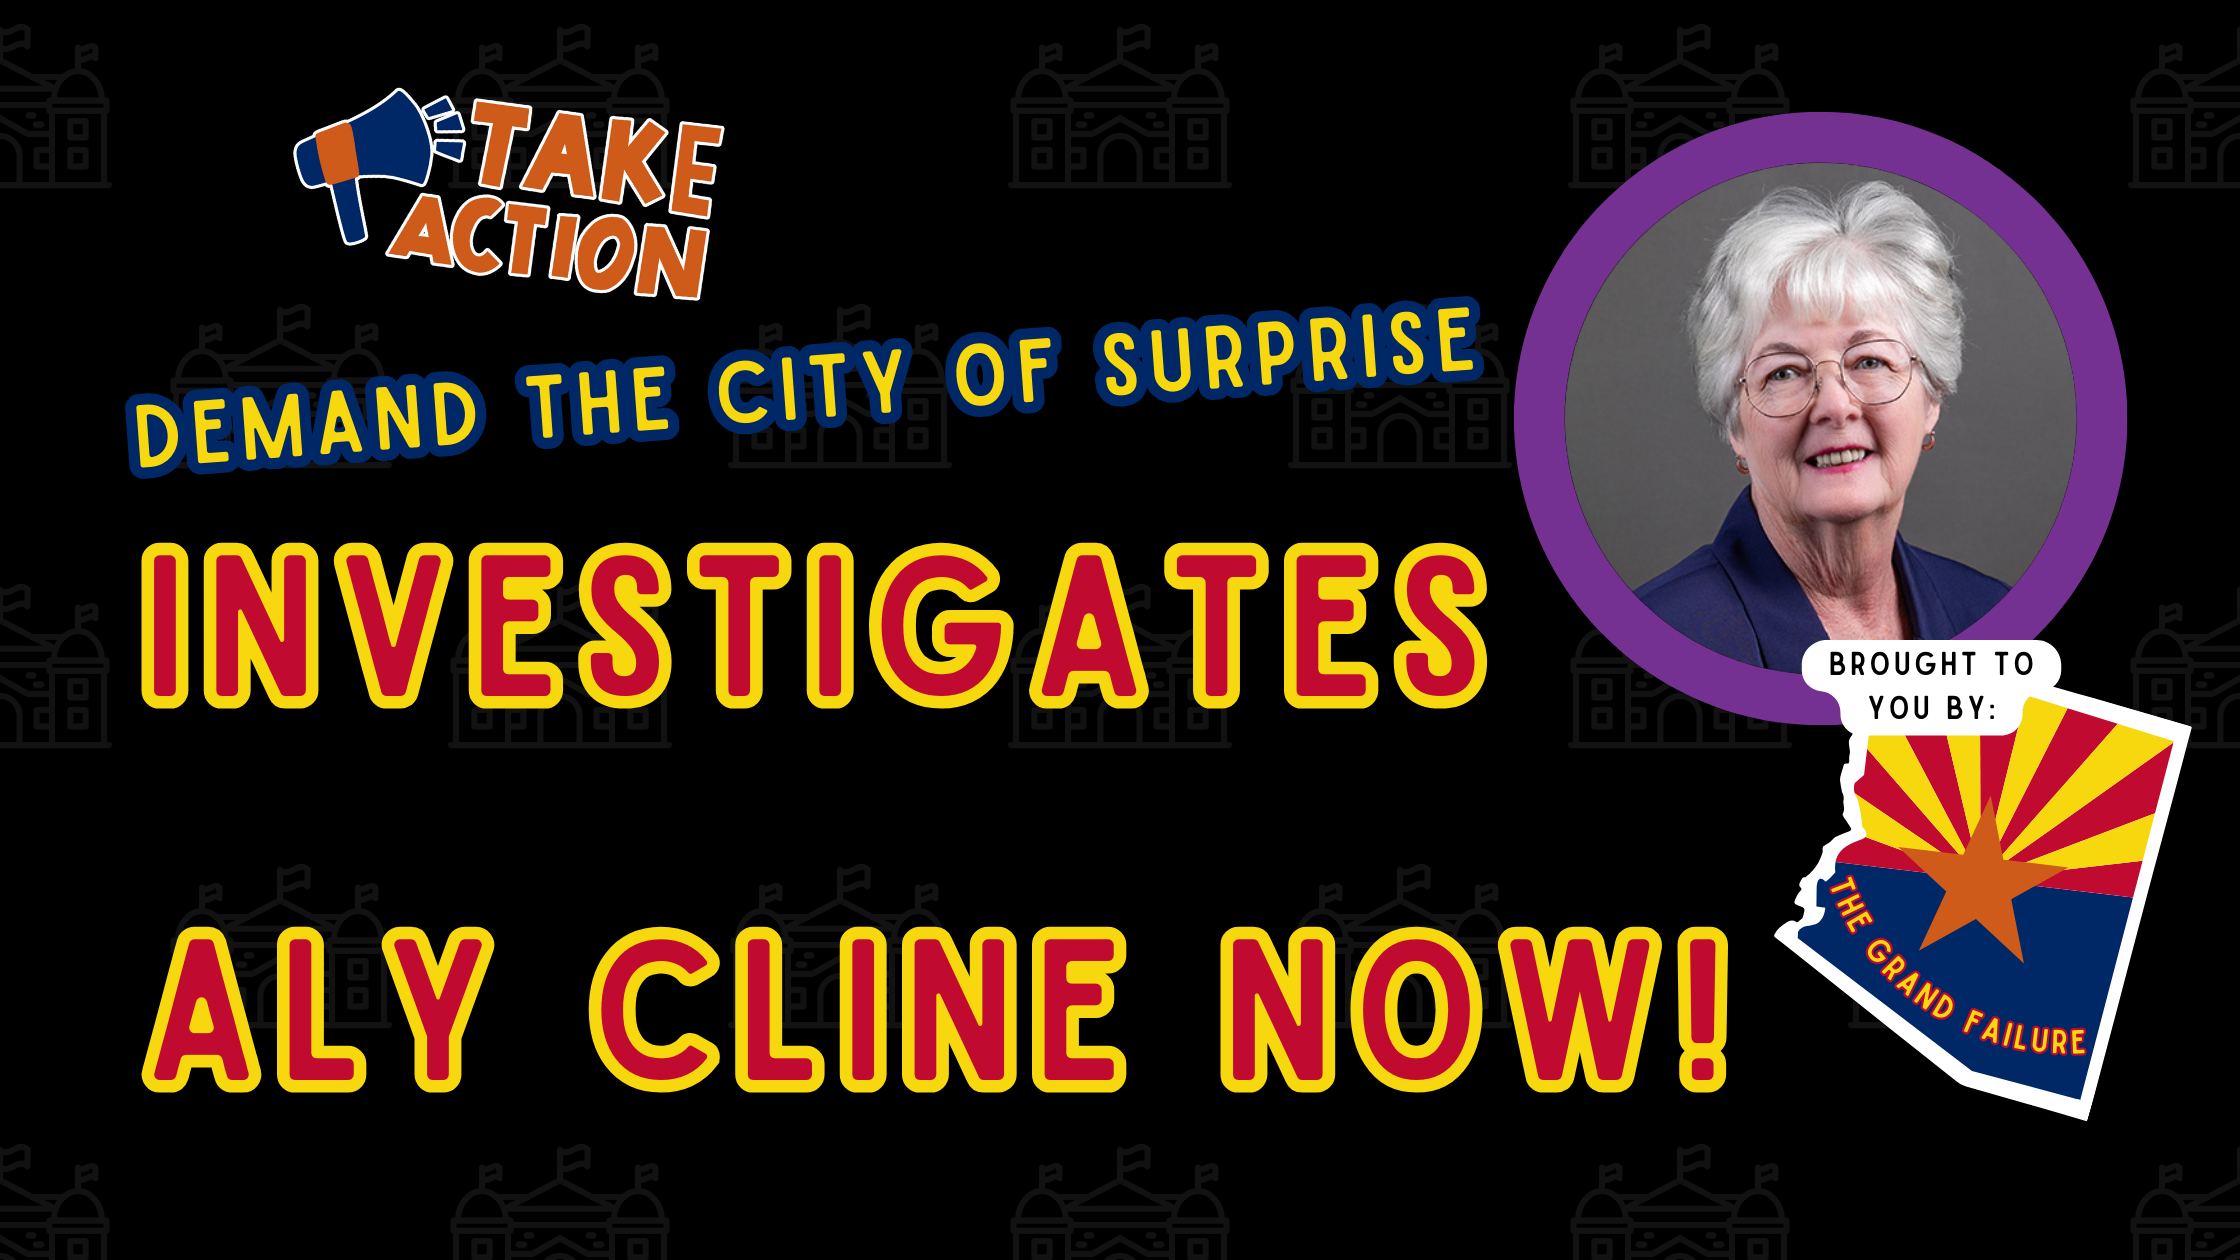 image that reads "demand the city of surprise investigate aly cline now!"